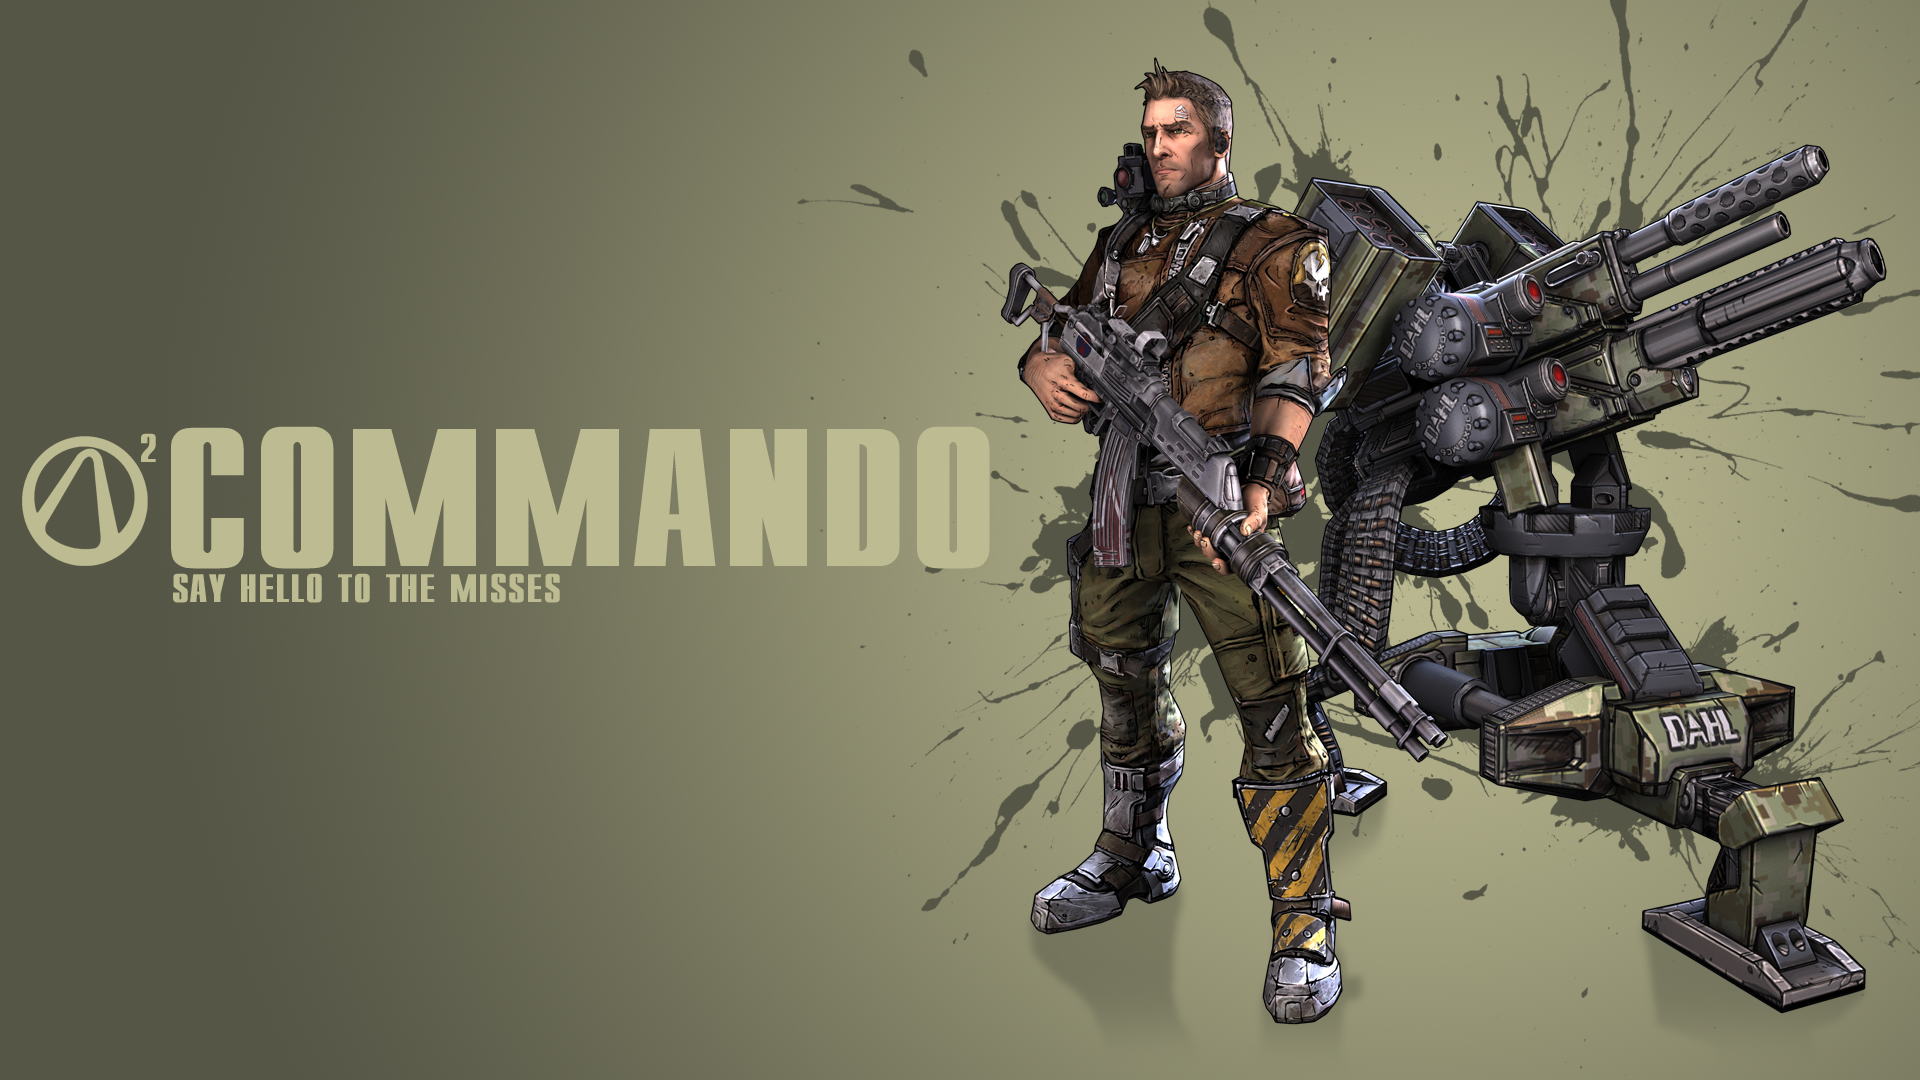 Represent Your Borderlands 2 Character With Some Fancy Wallpaper